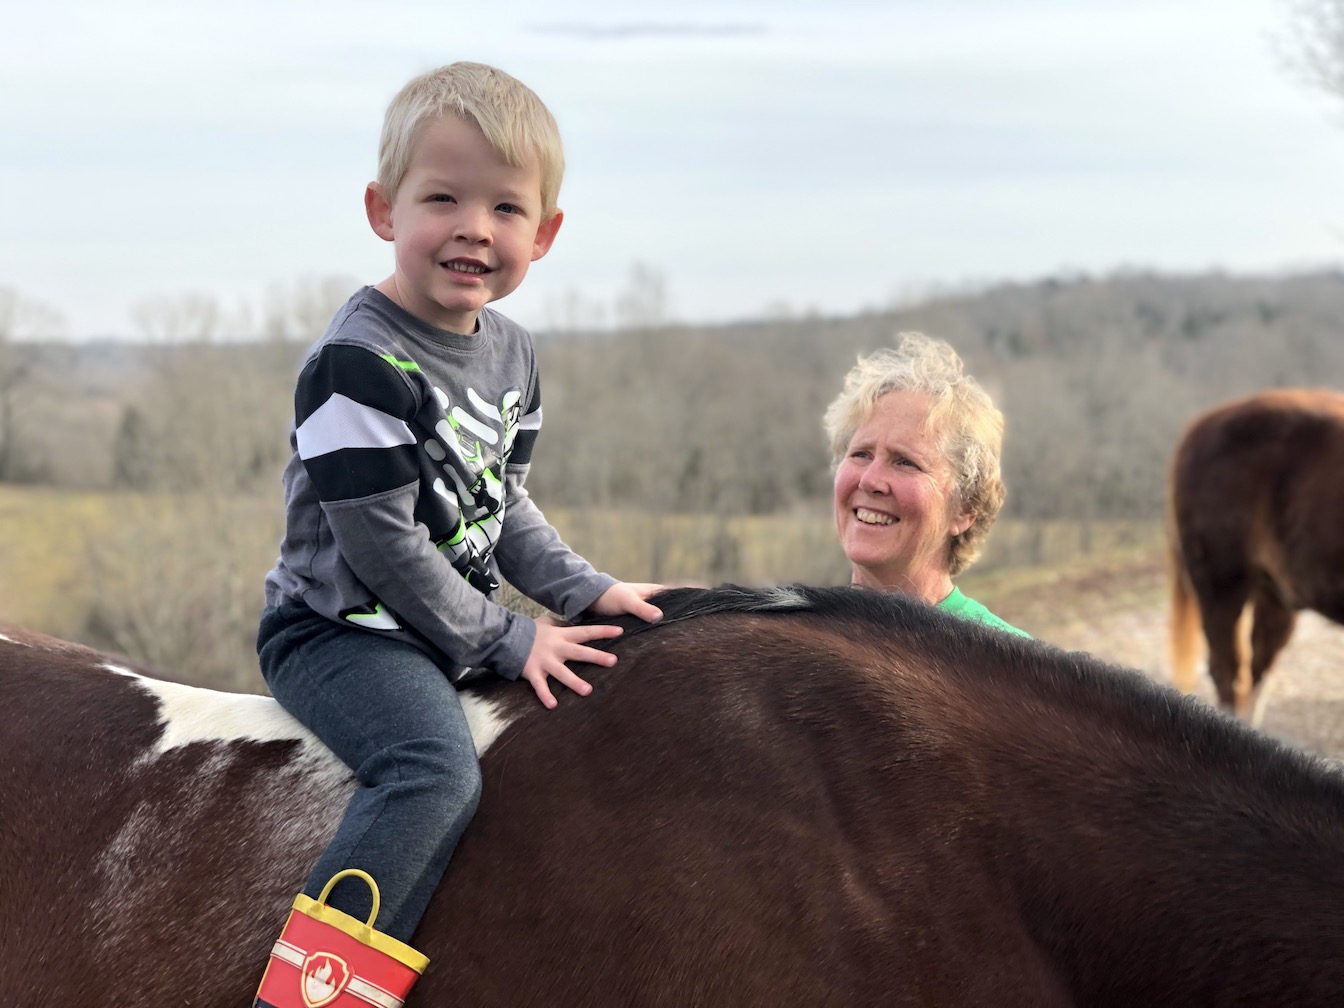 Jennifer Crossen and her nephew Sawyer Crossen horseback riding in Lawrenceburg, KY (which is about 25 miles west of Lexington), 2019.